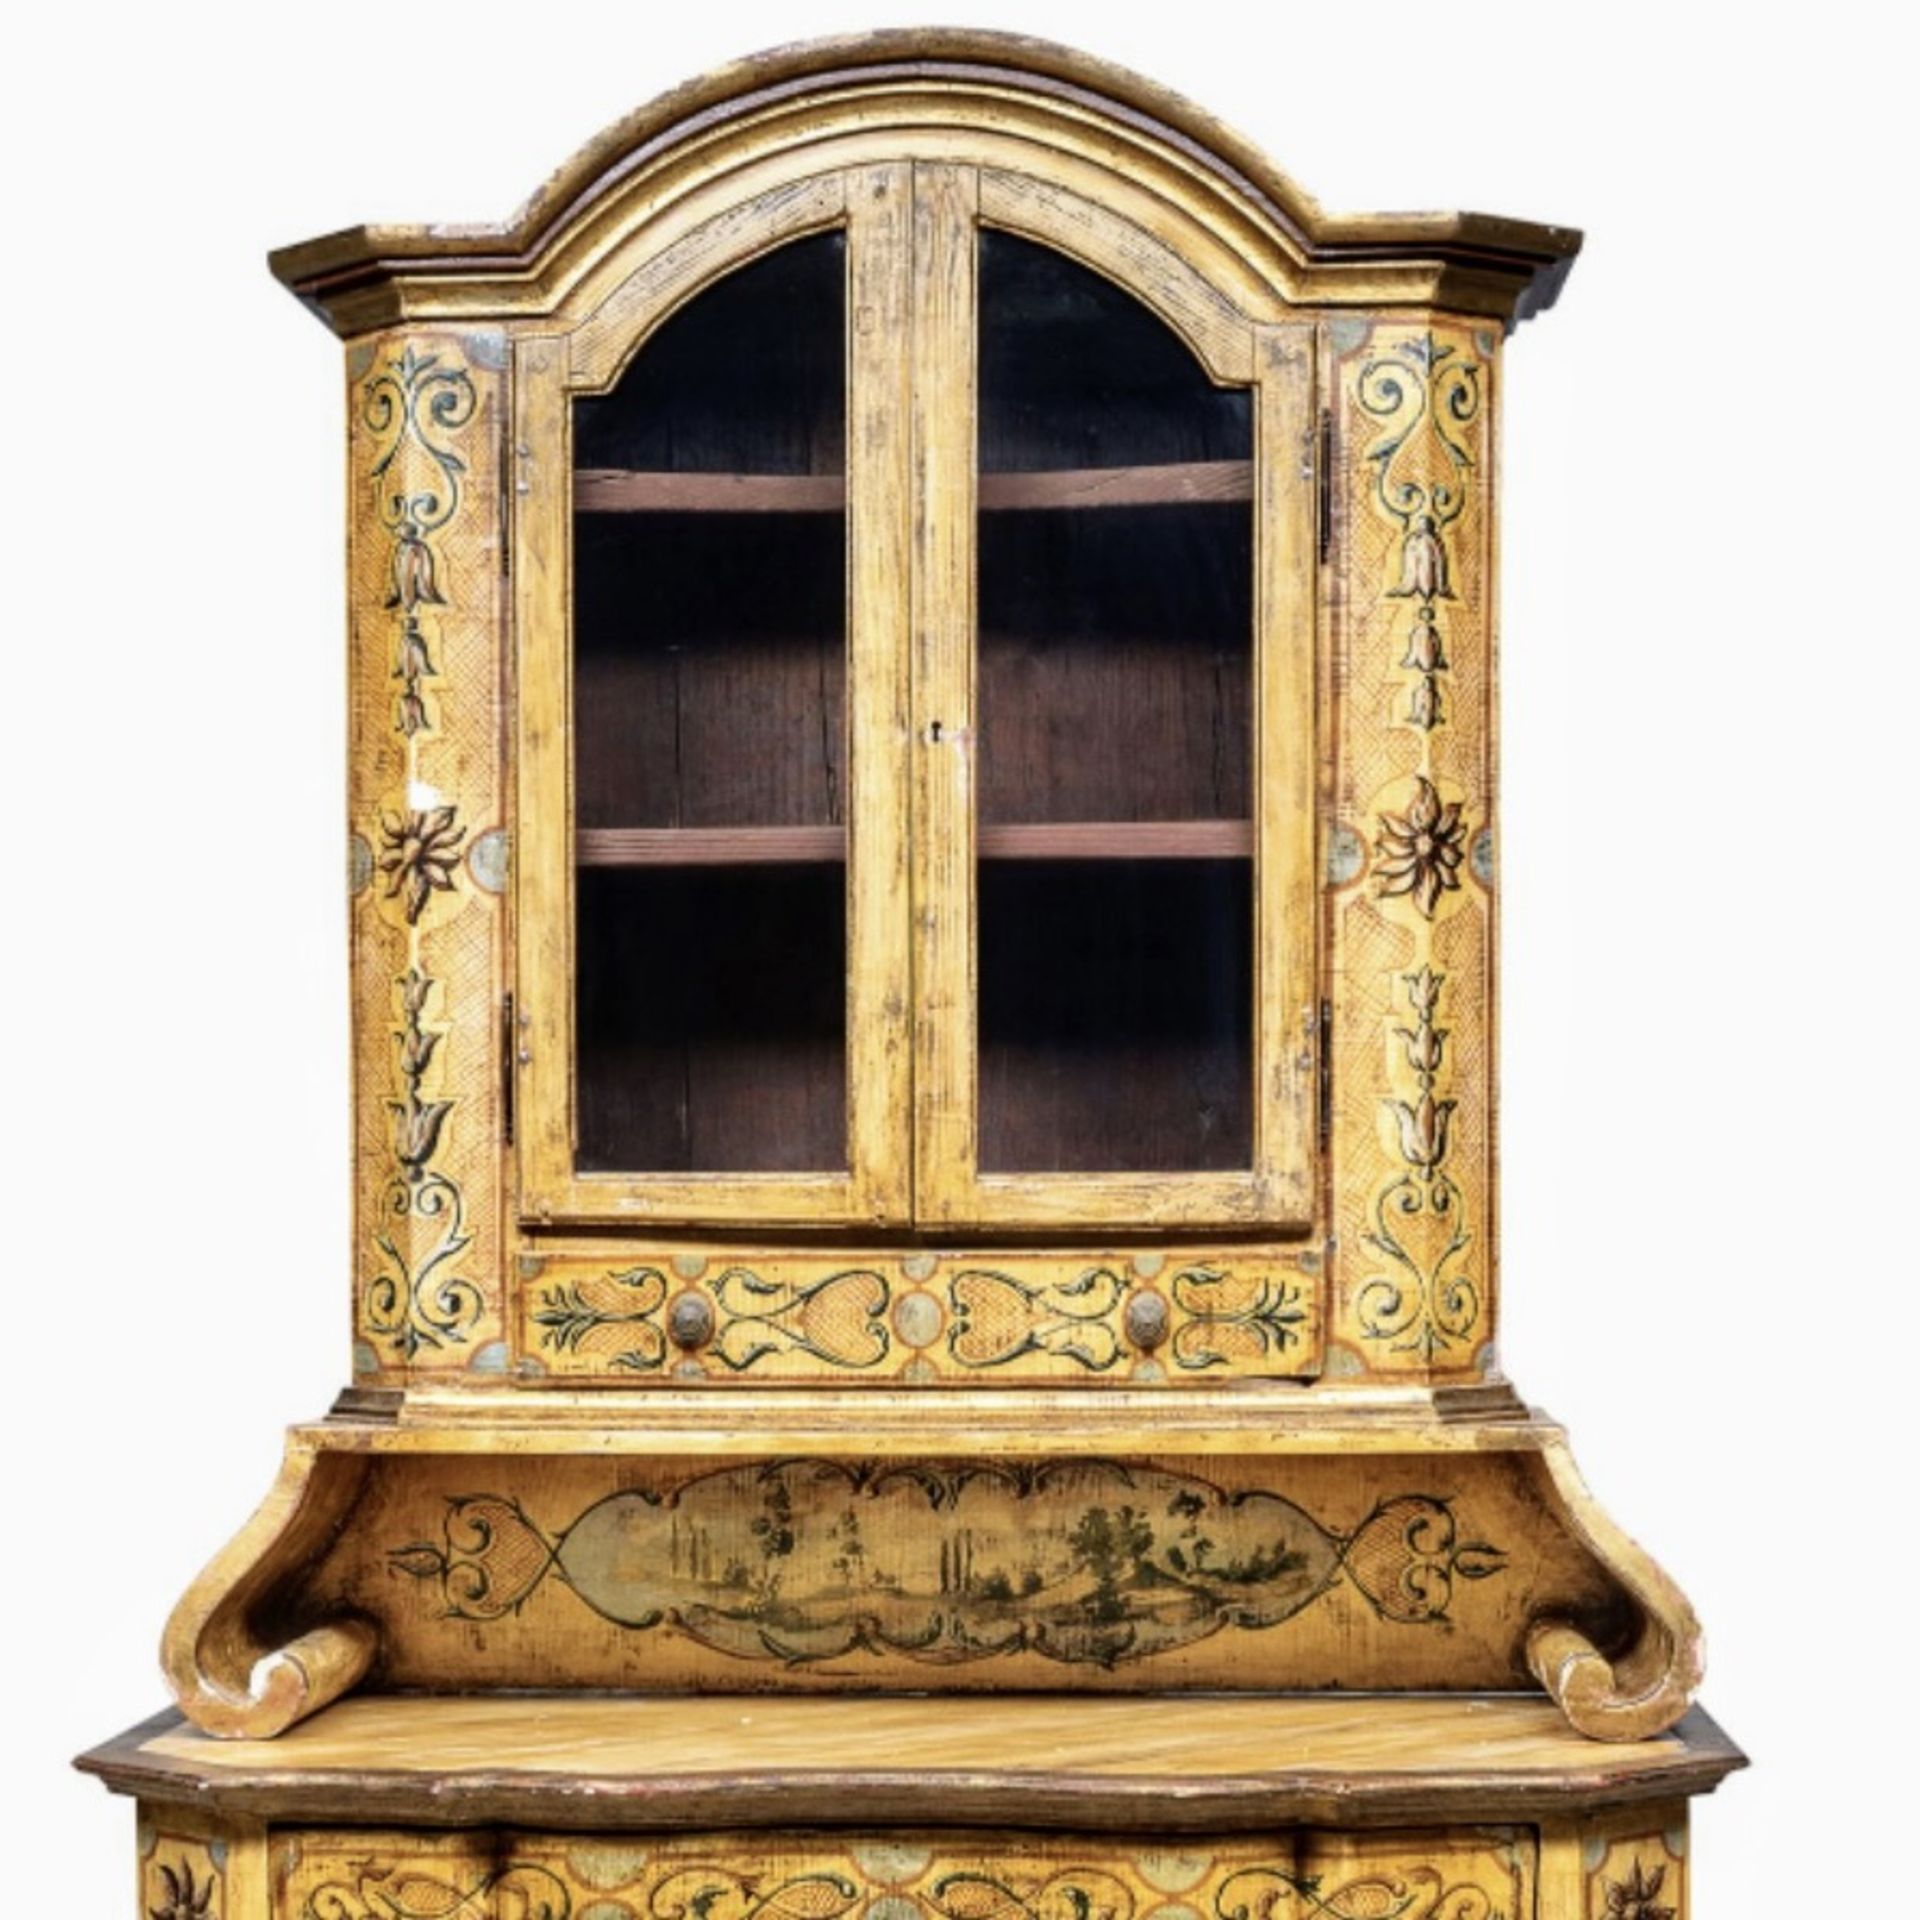 A 19TH CENTURY AUSTRO-HUNGARIAN PAINTED WOOD BOOKCASE CABINET - Image 3 of 5